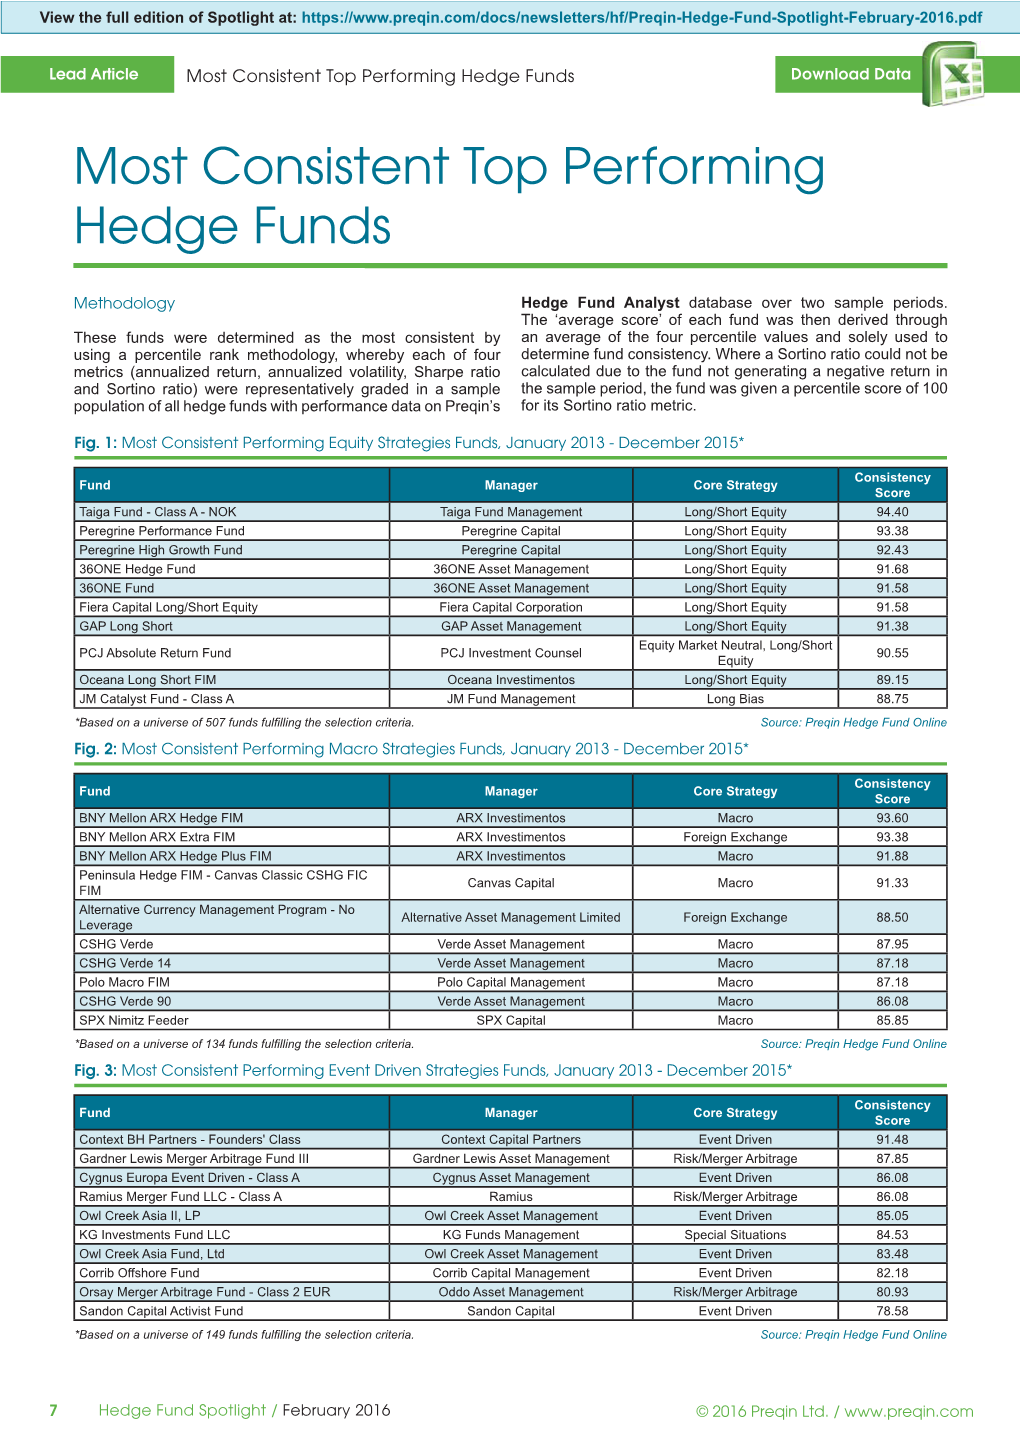 Most Consistent Top Performing Hedge Funds Download Data